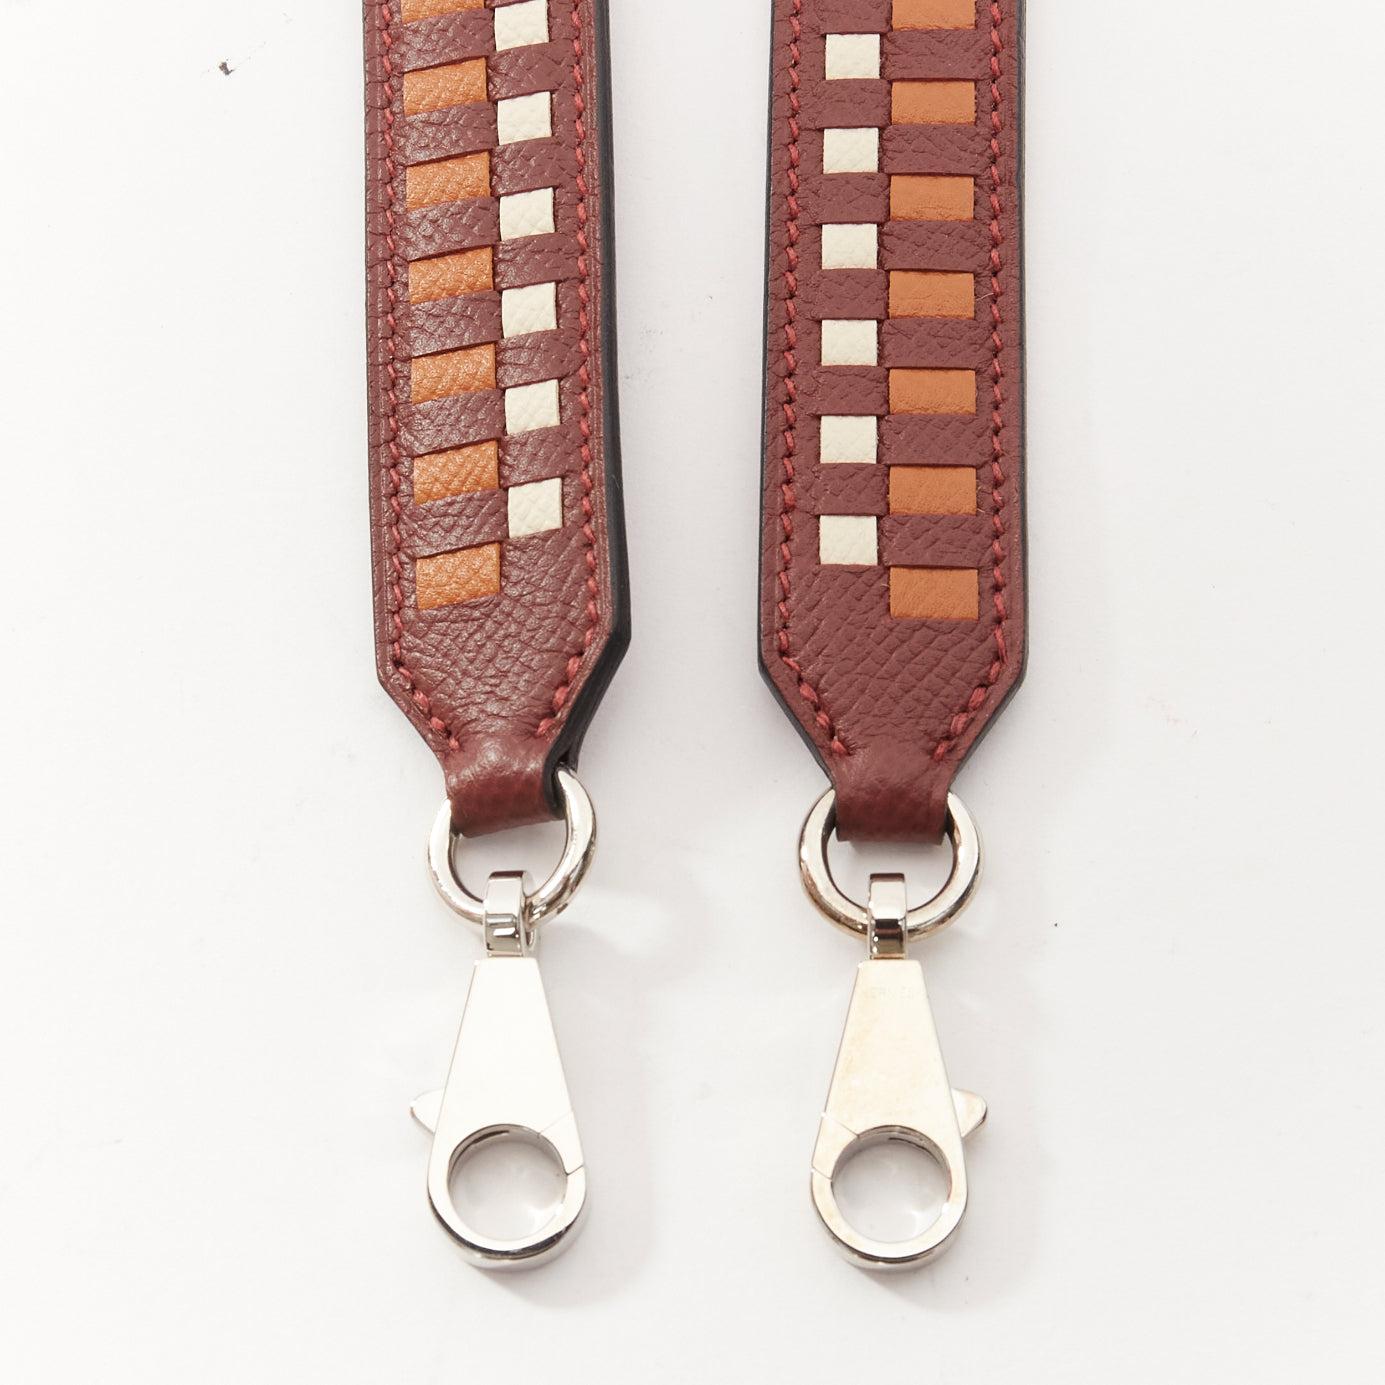 HERMES Sangle 25 brown white woven leather silver hardware bag strap
Reference: AAWC/A01187
Brand: Hermes
Model: Sangle 25
Material: Leather
Color: Brown, White
Pattern: Solid
Closure: Lobster Clasp
Lining: Brown Leather
Made in: